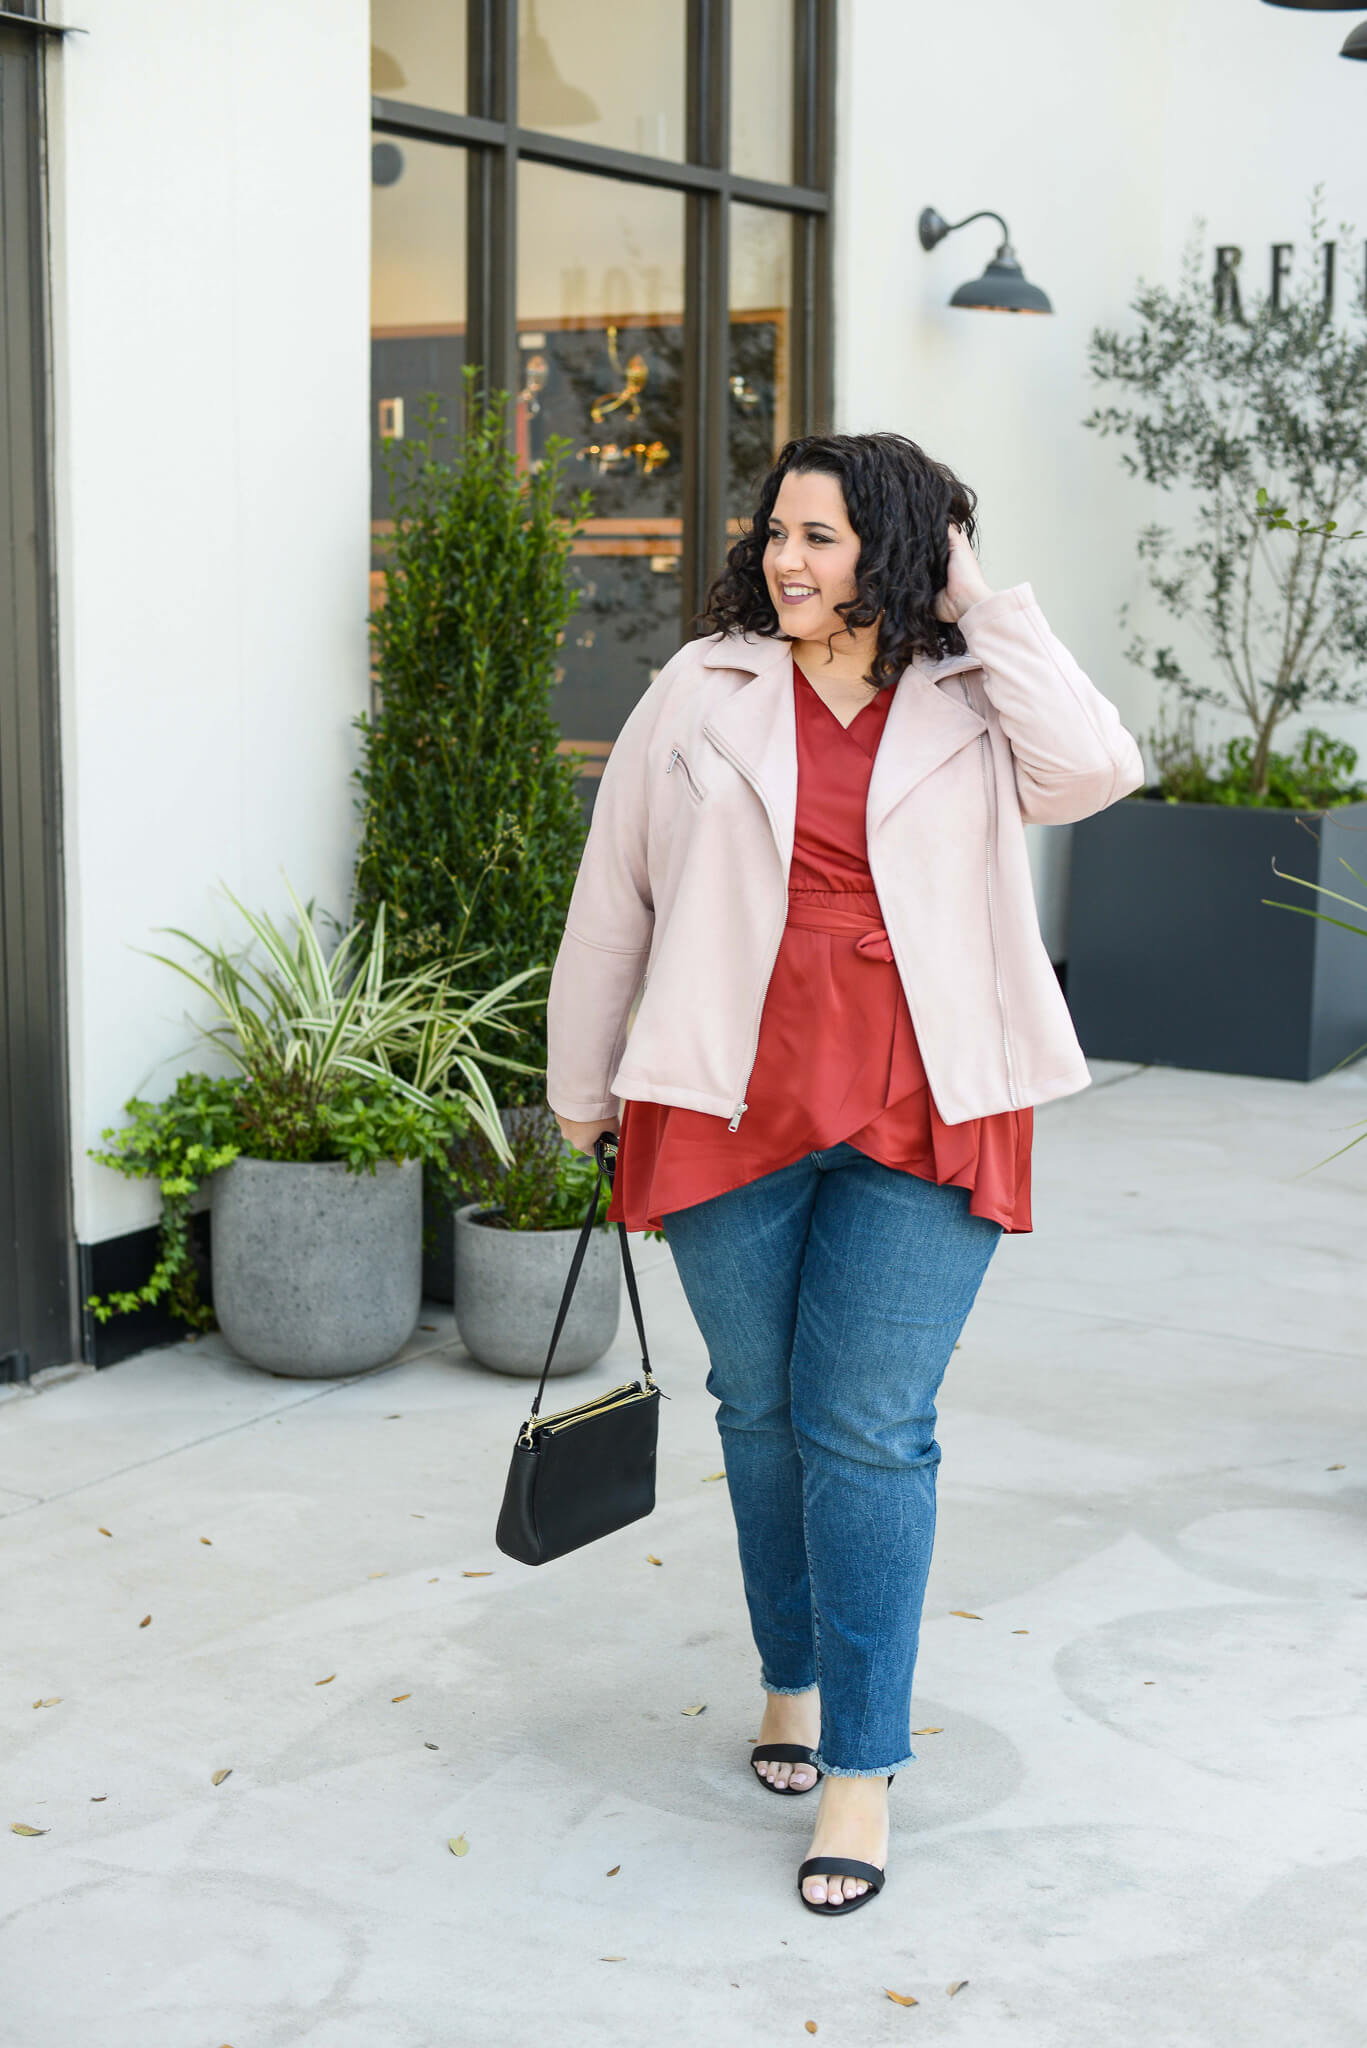 What to wear to date night plus size 